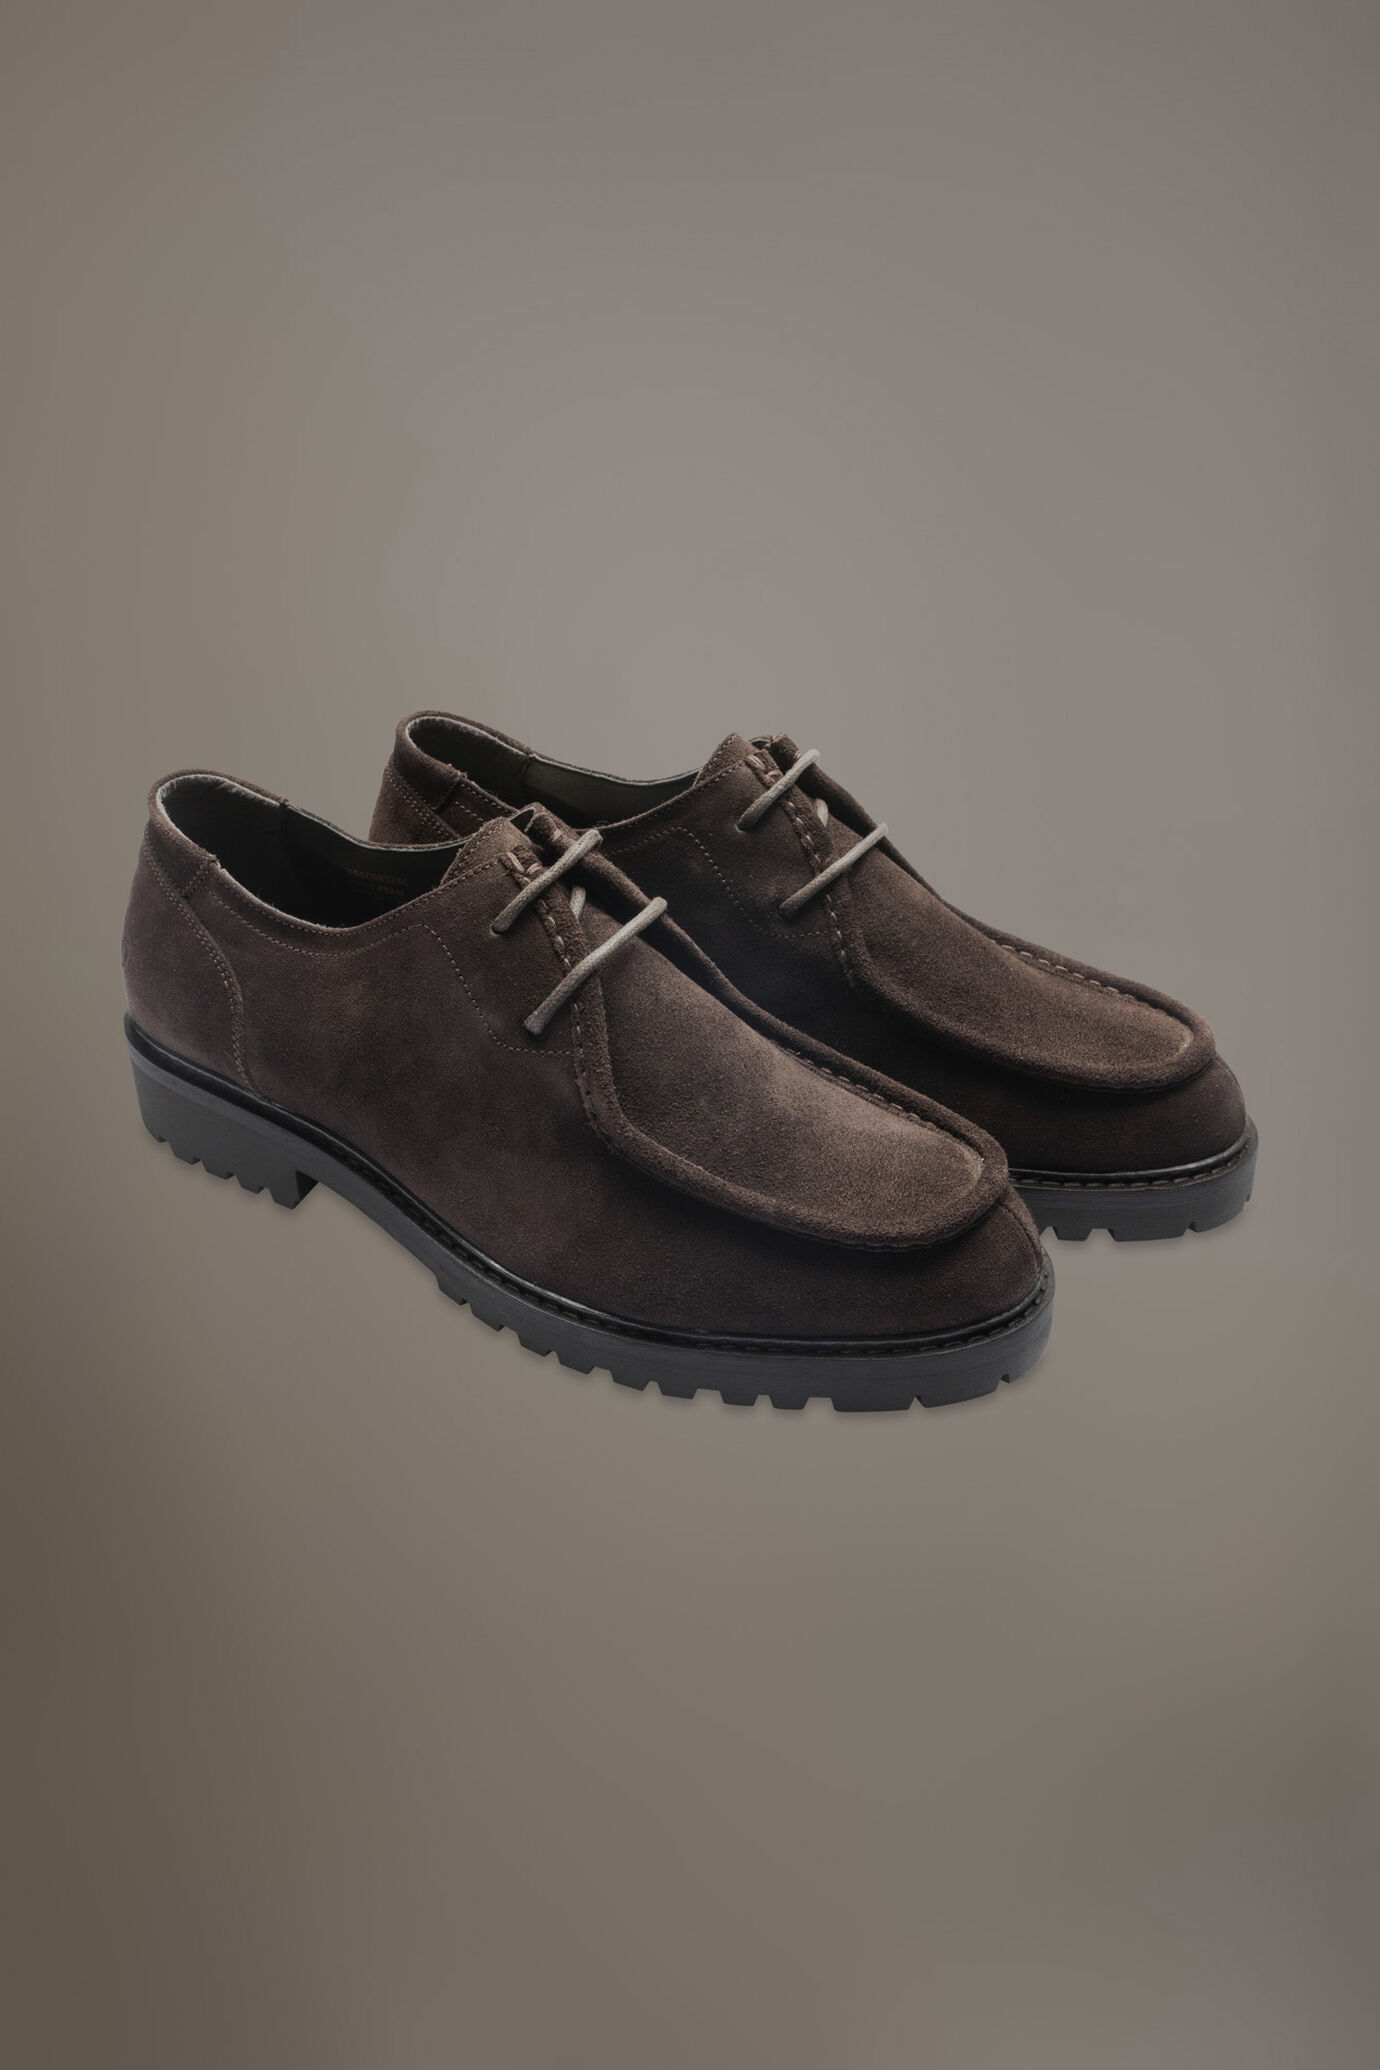 100% suede leather ranger shoe with rubber sole